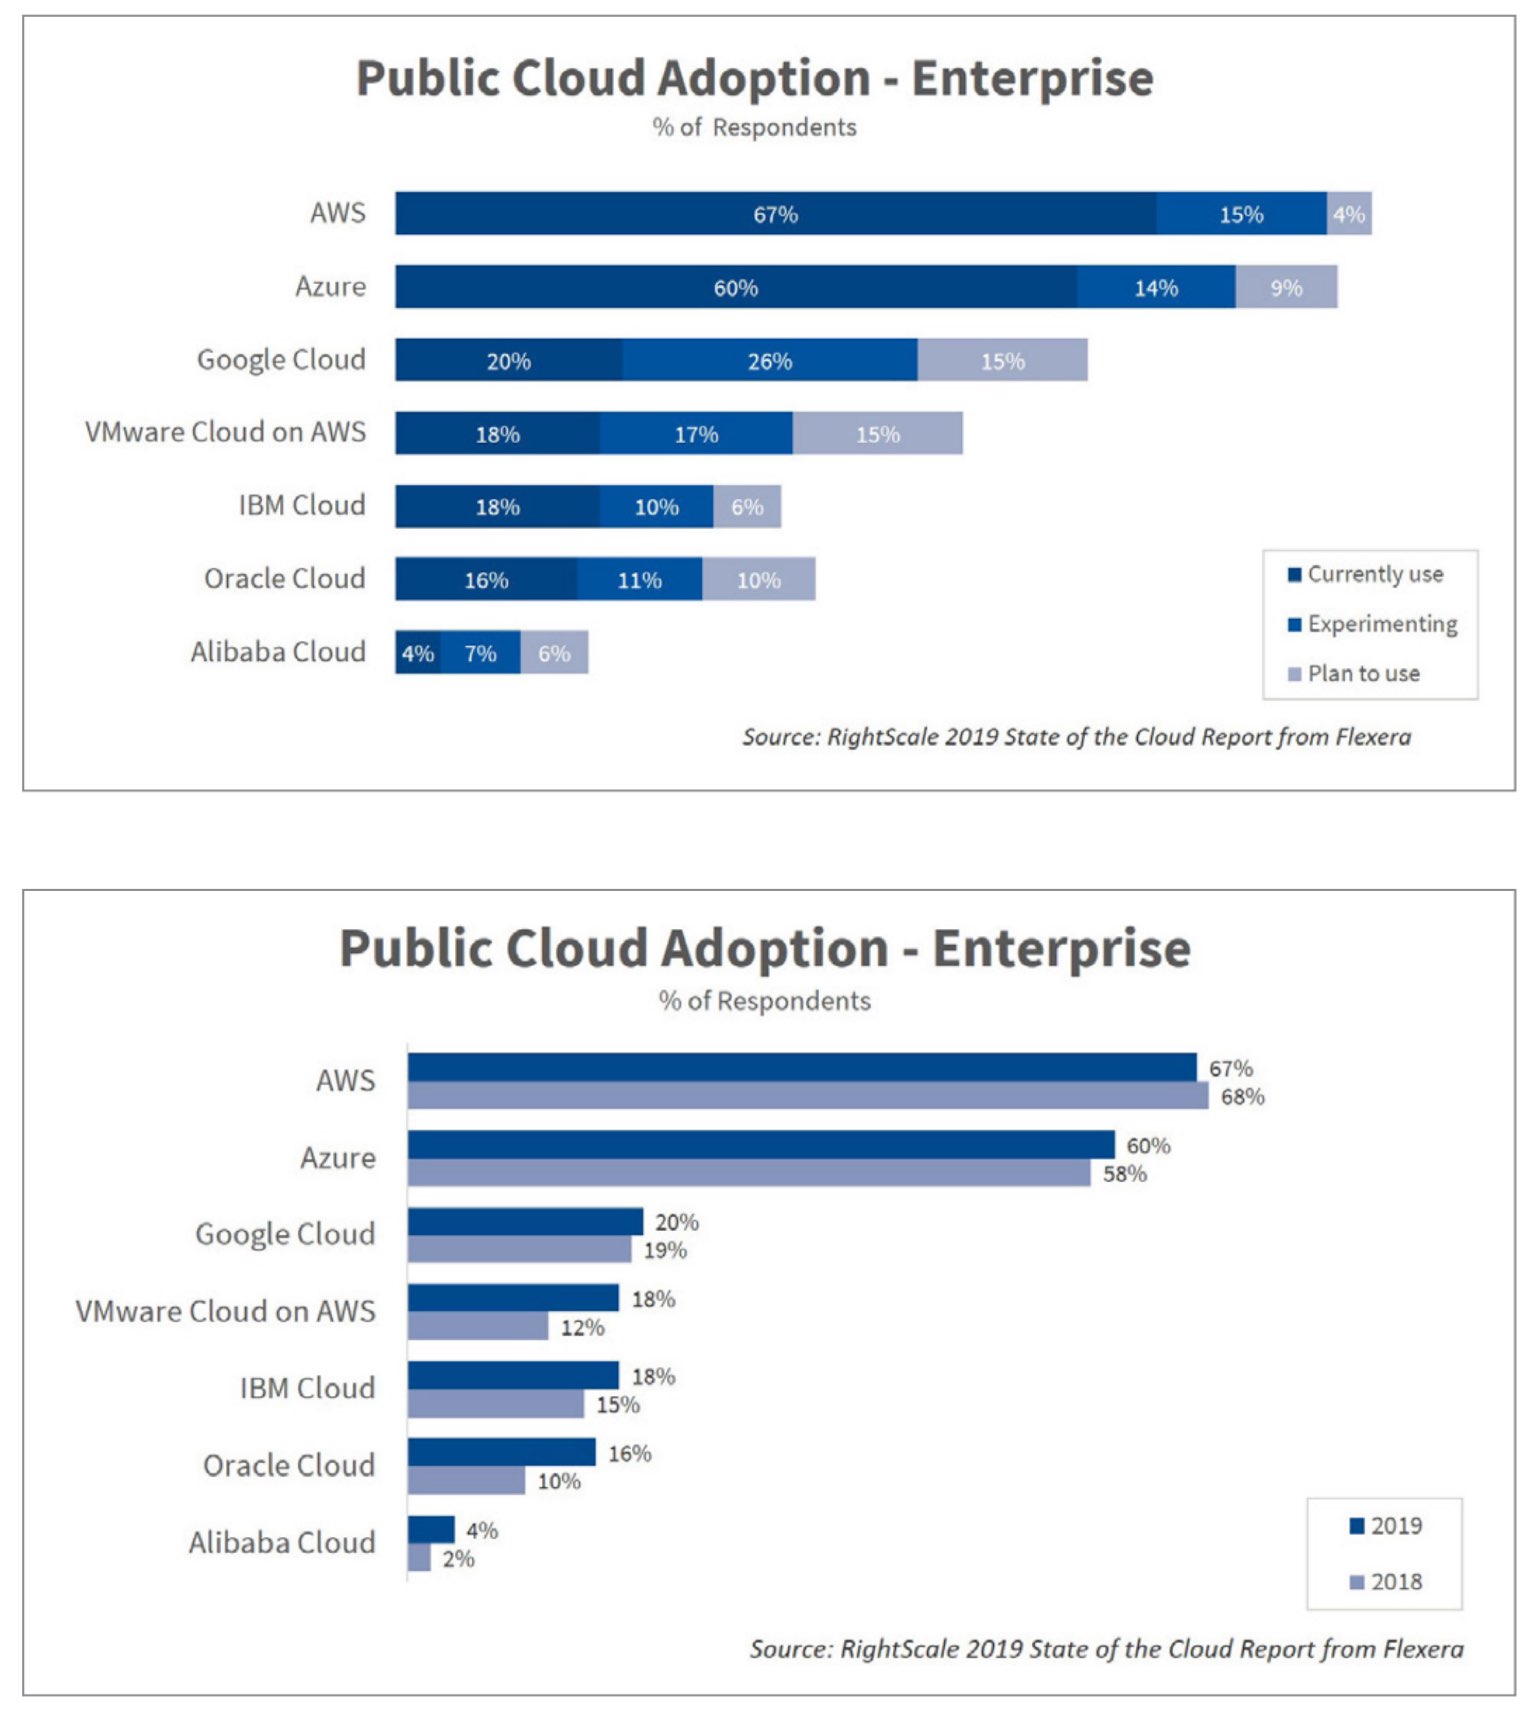 Public Cloud Adoption, RightScale 2019 State of the Cloud-Report from Flexera